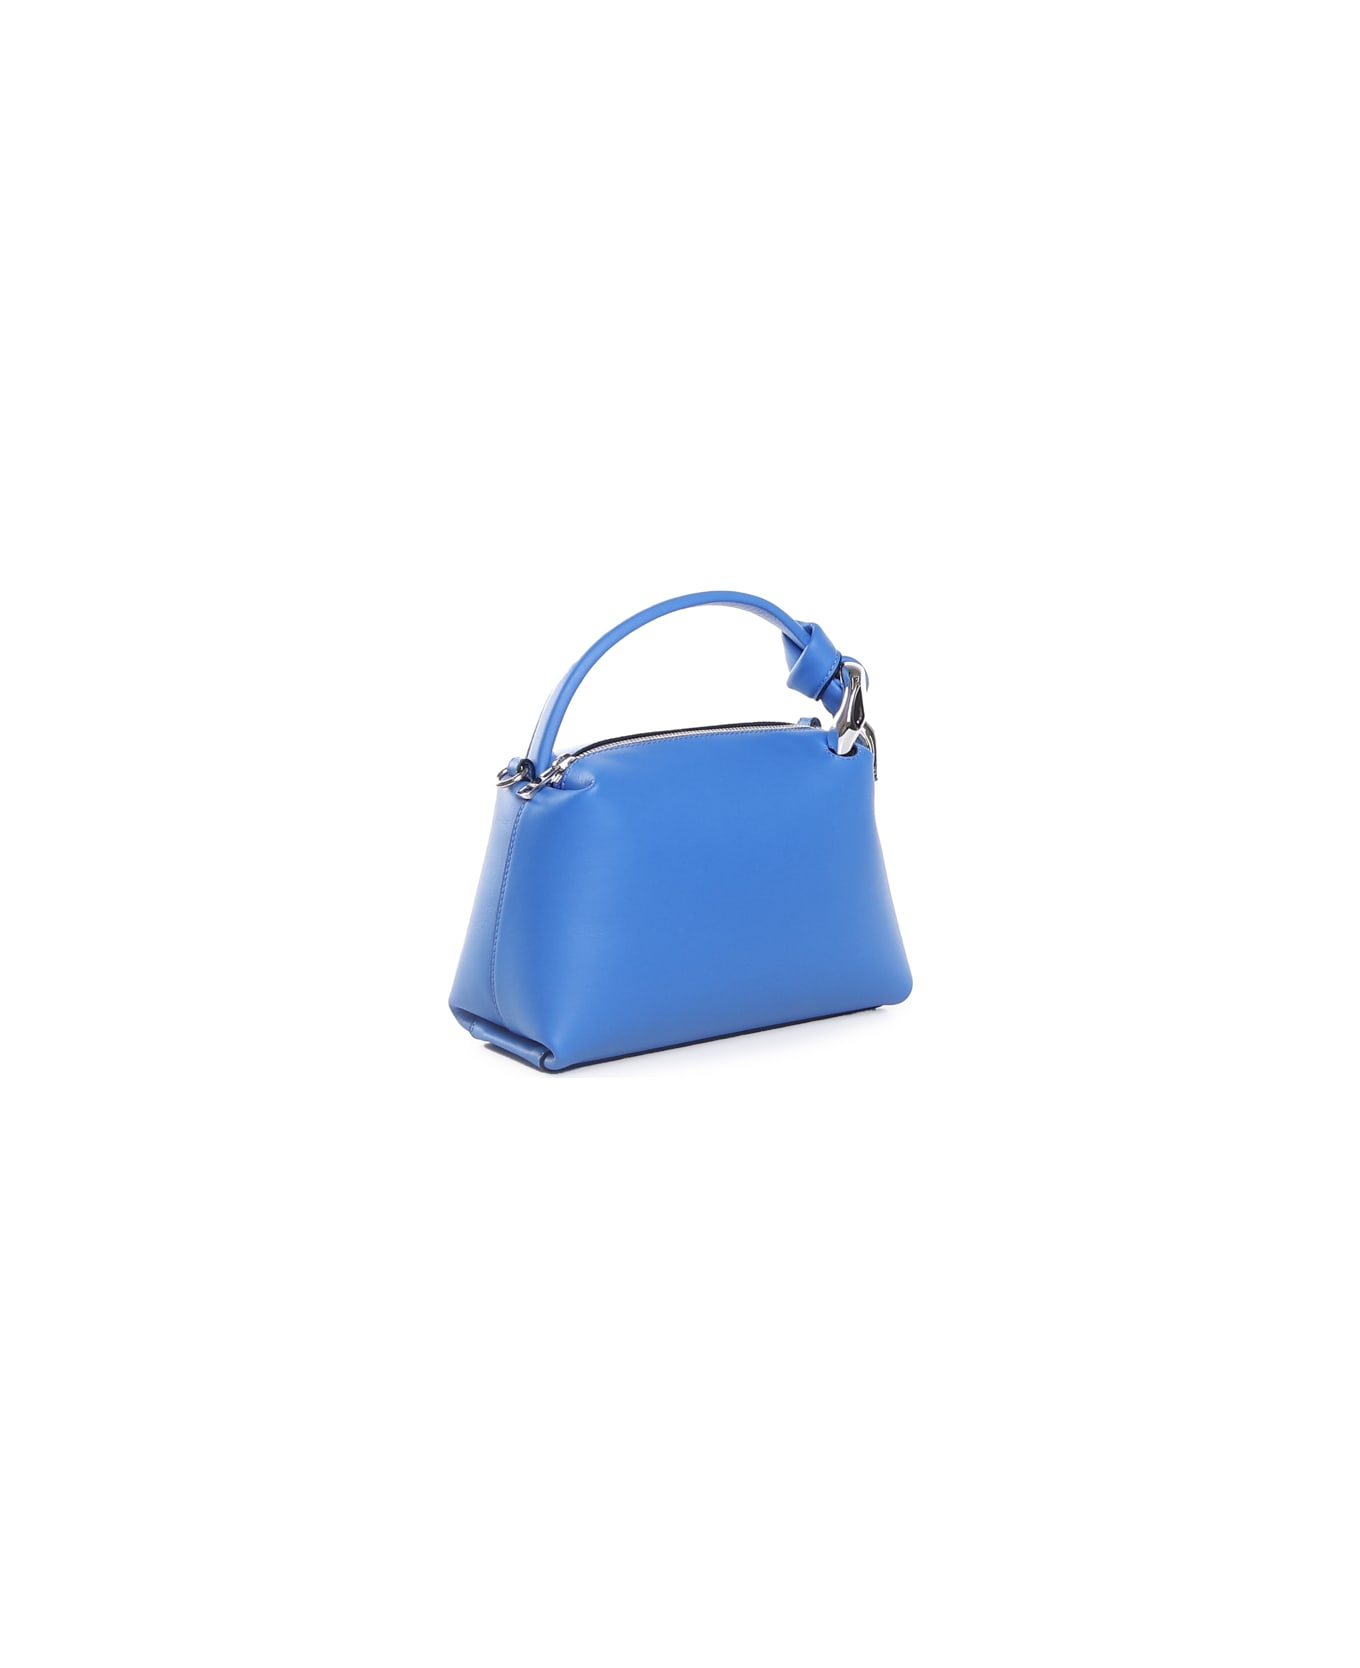 J.W. Anderson Small Corner Bag In Leather - SKY BLUE